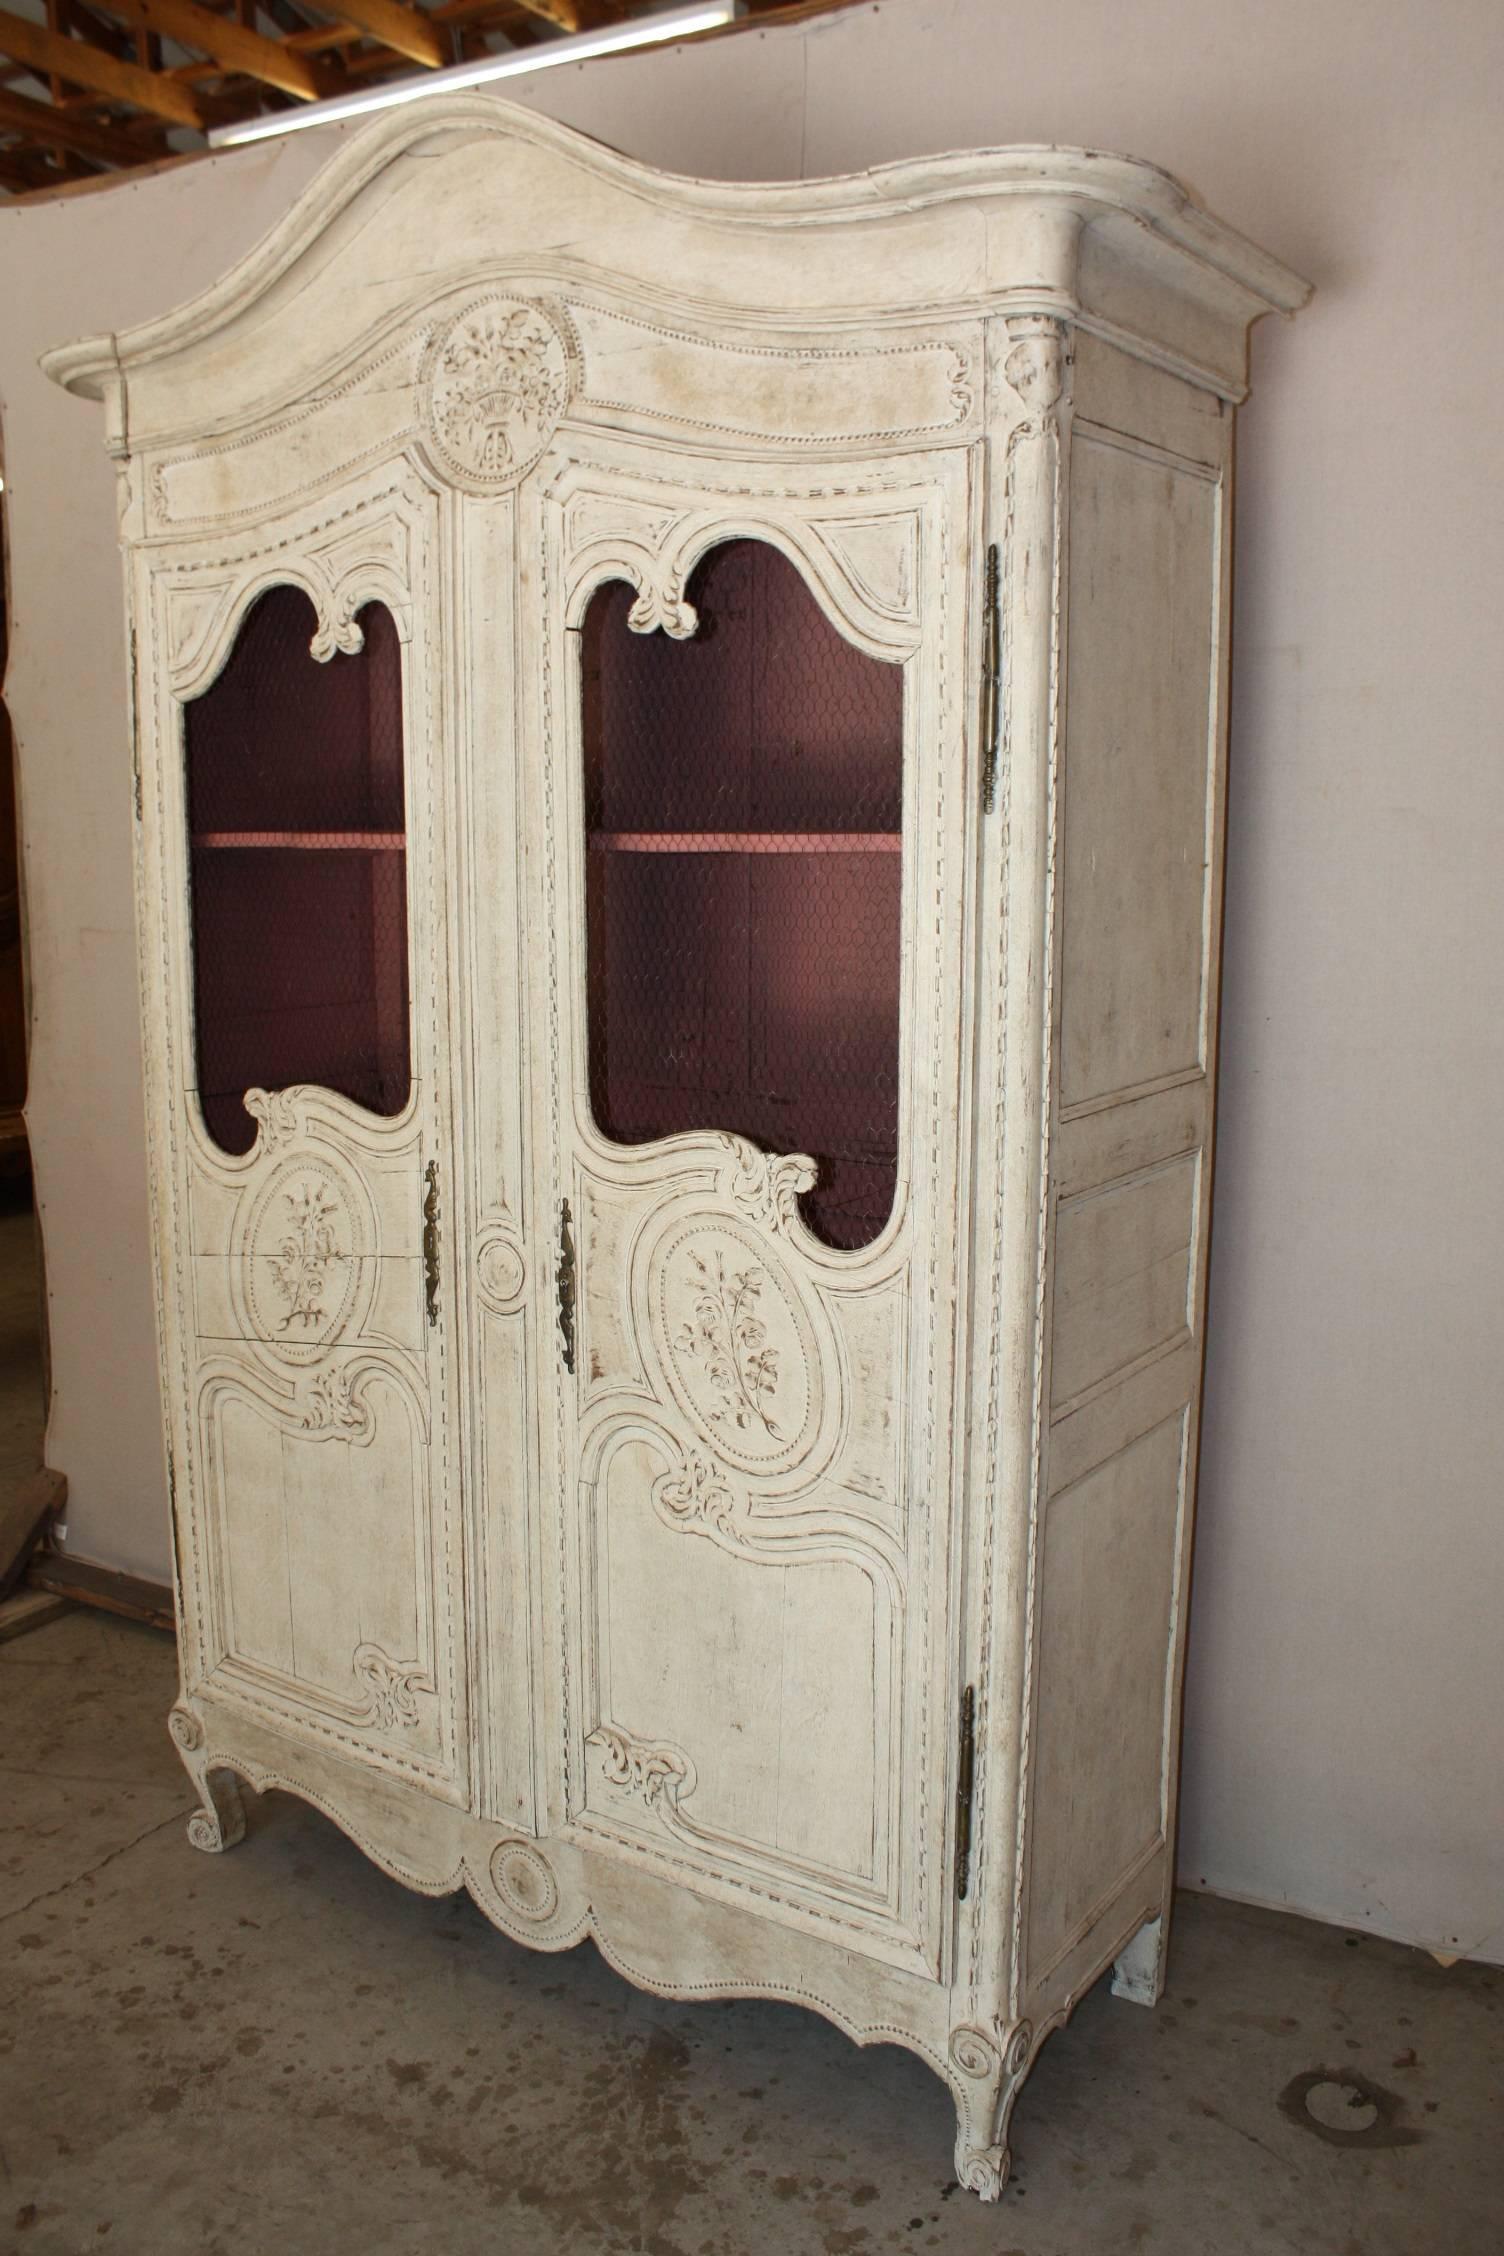 19th century French hand-carved and painted Louis XV armoire with chicken wire doors. This piece is carved with flowers has two shelves and a painted pink interior.